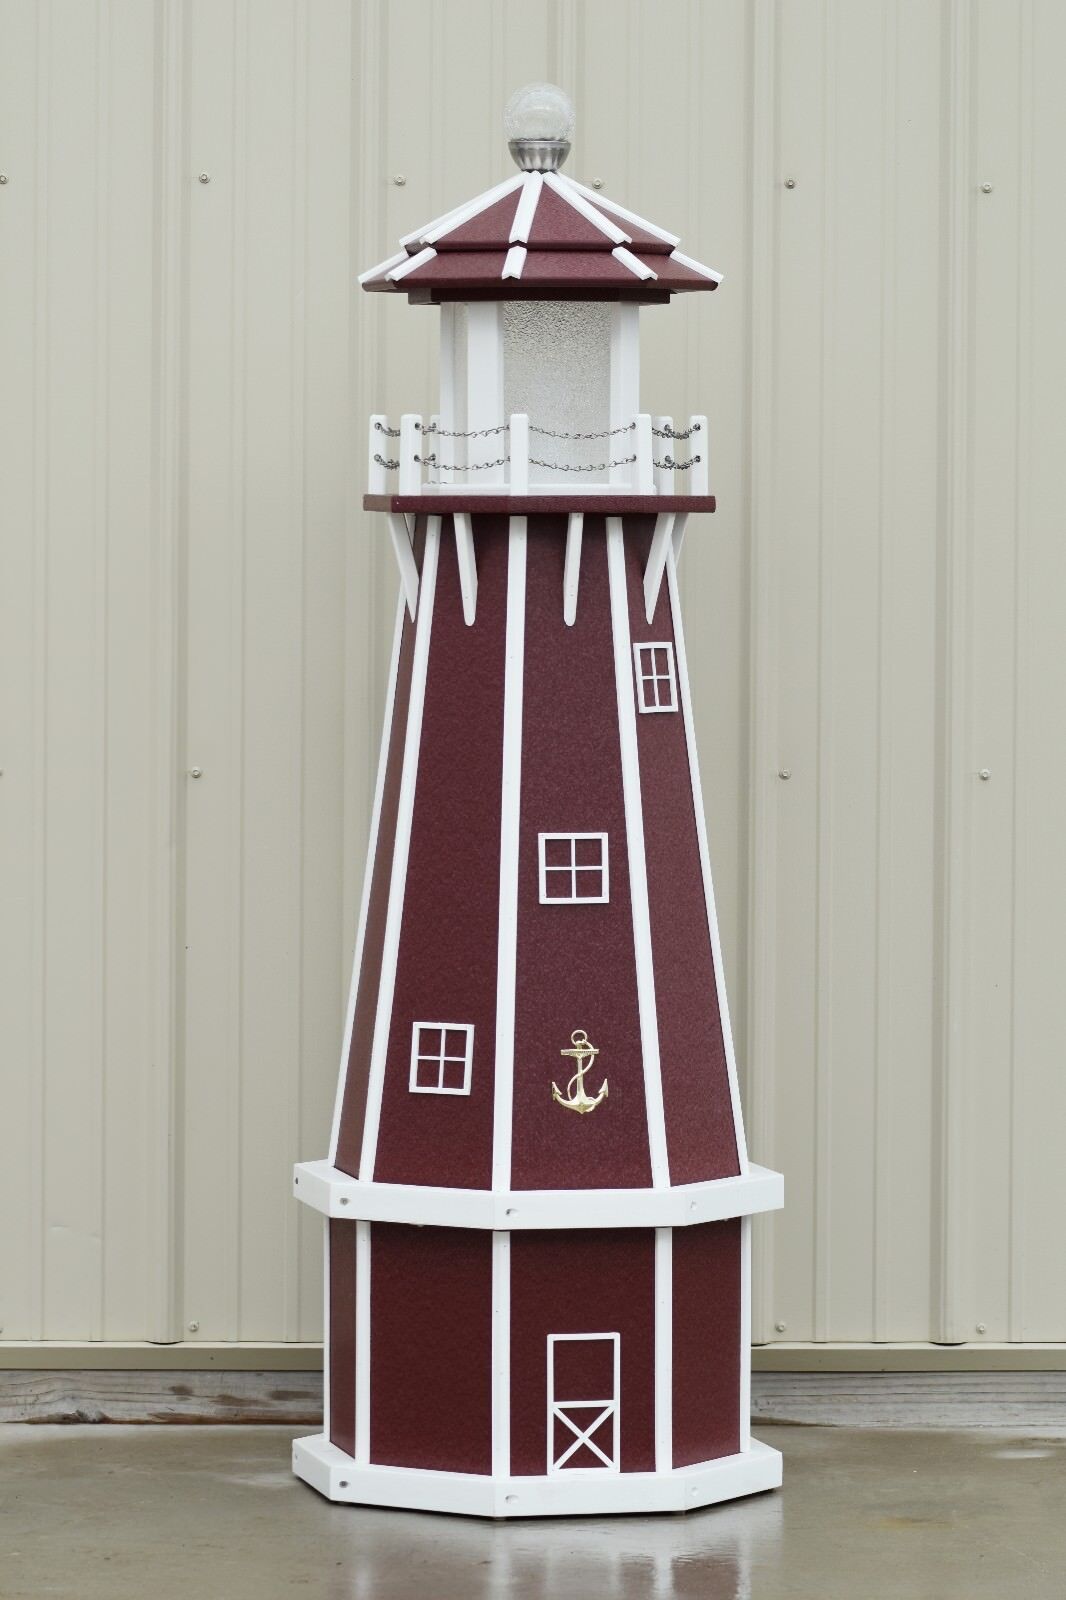 5' Octagon Handcrafted Poly Lumber, Wood Looking Lighthouse (cherry/white trim)